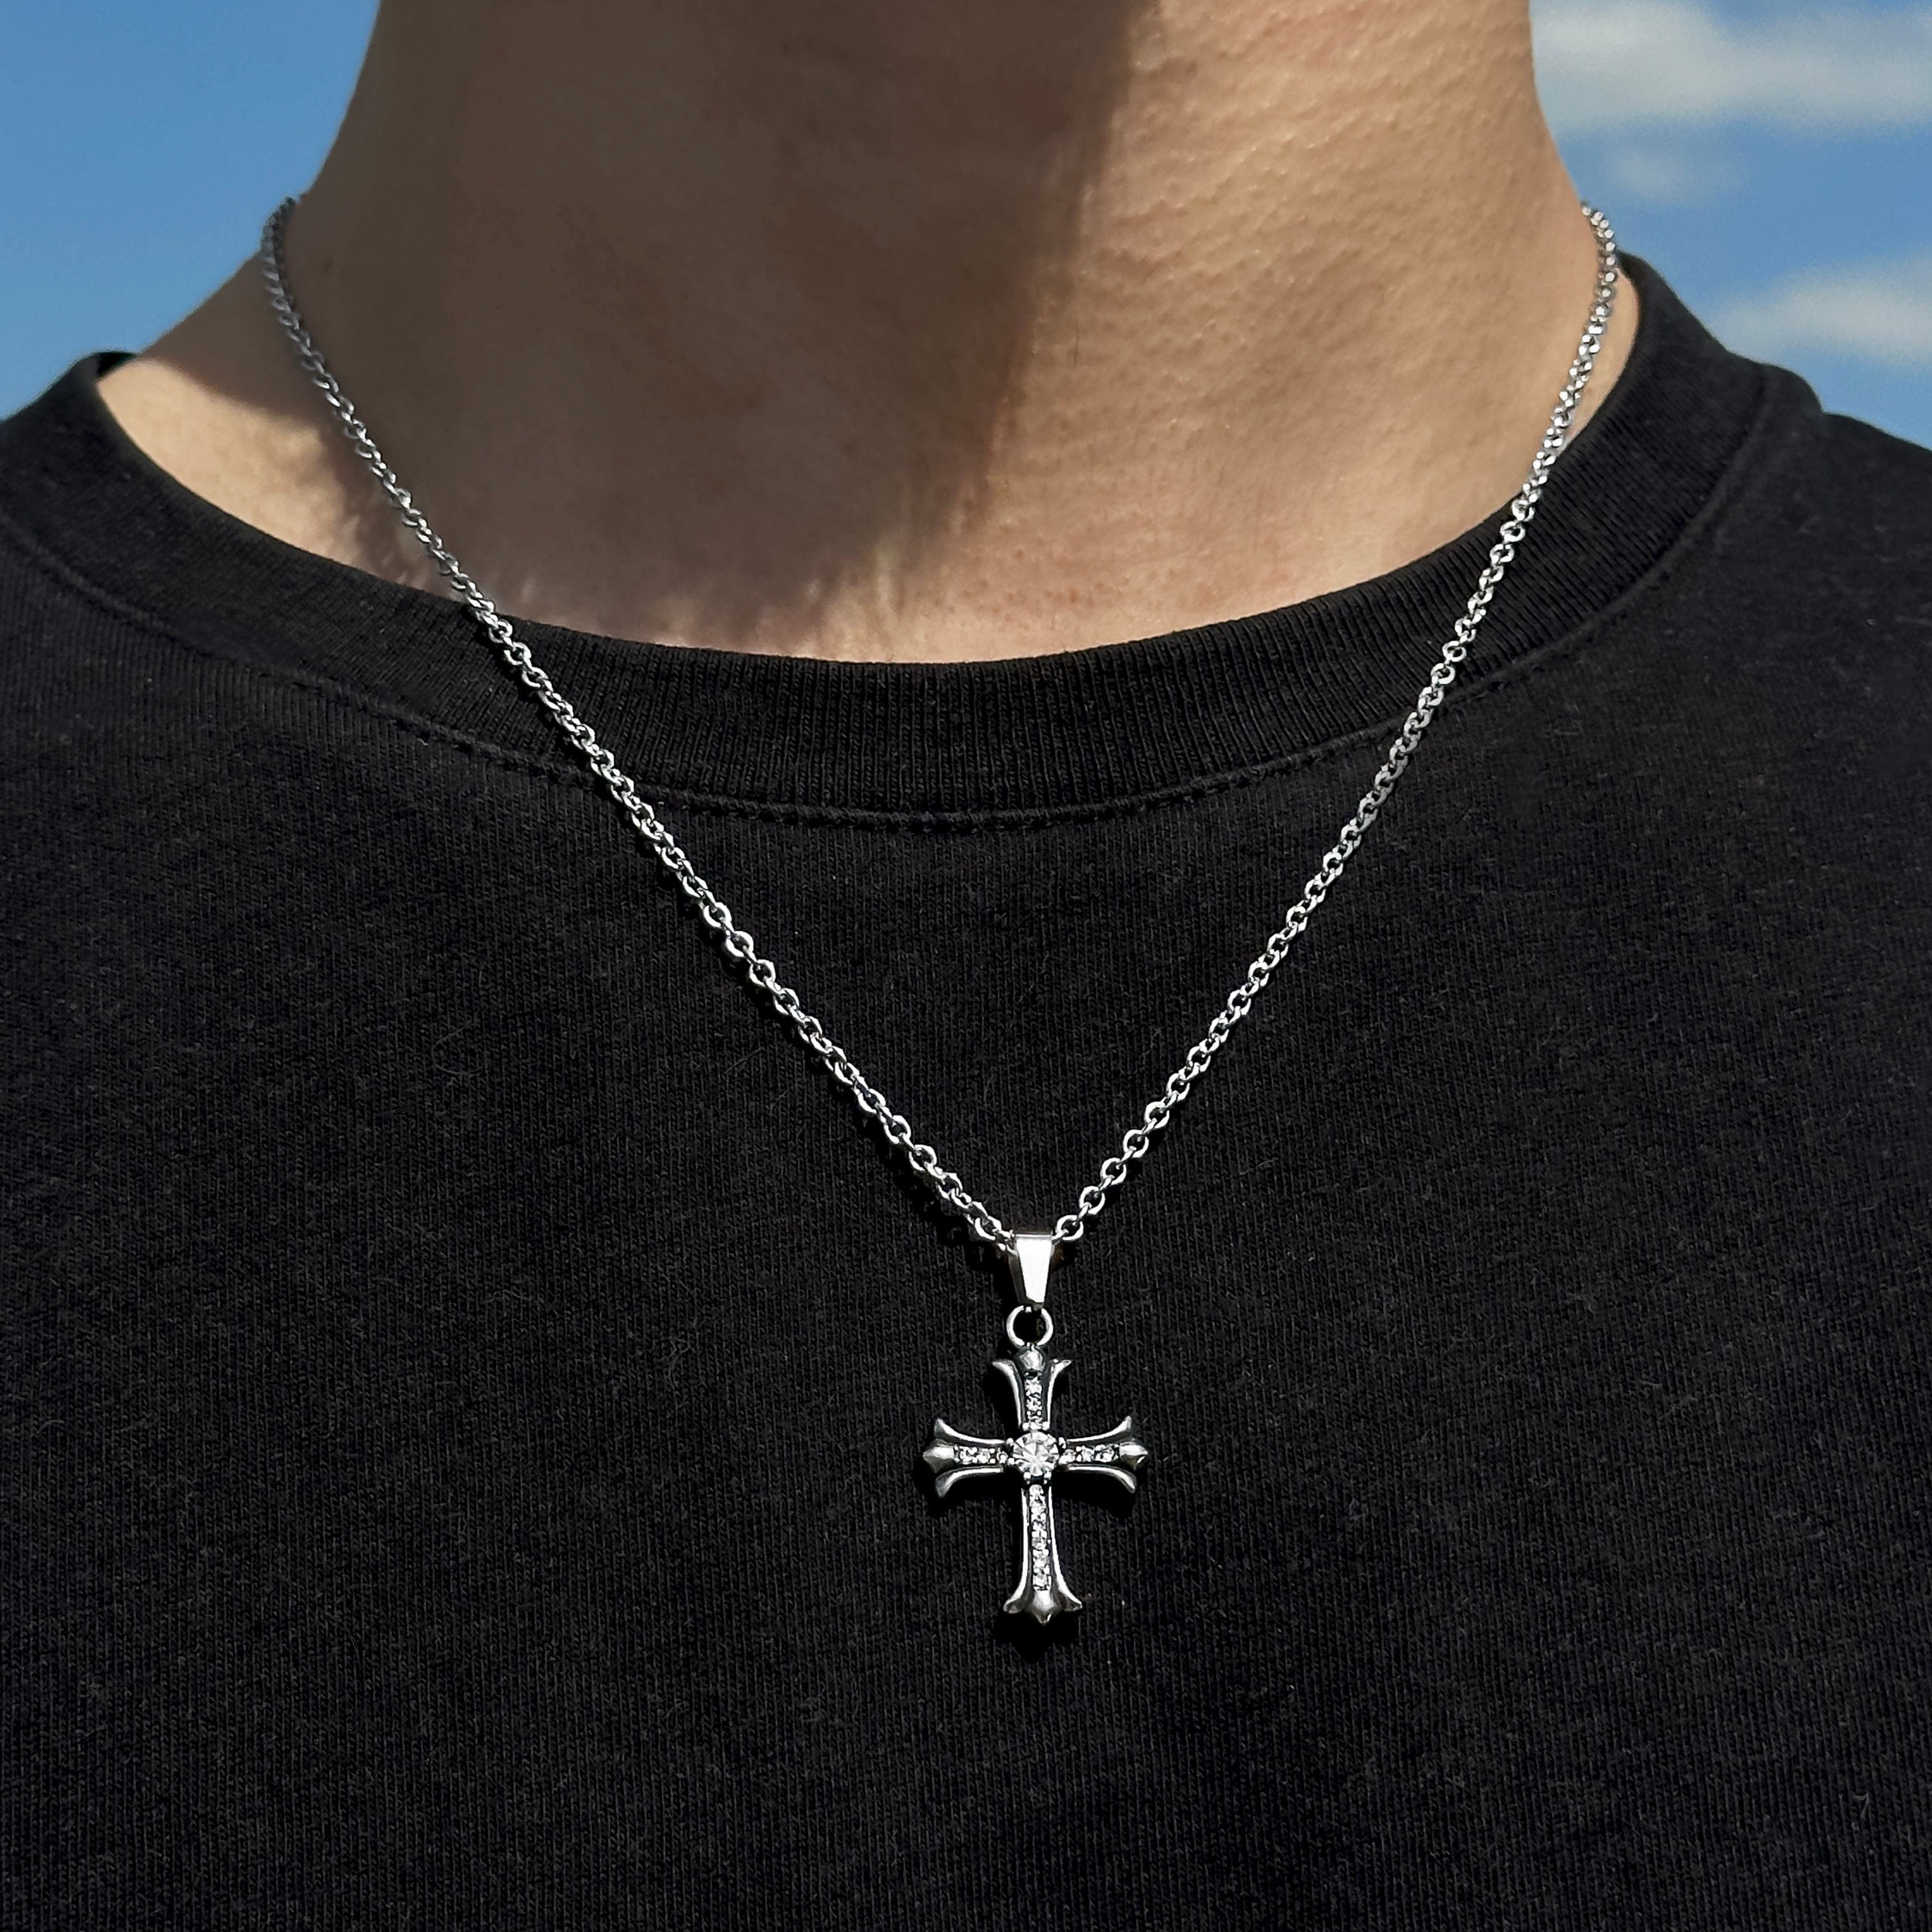 Chain with Pendant Shiny Cross Rolo Chain - Silver (2mm) - JVillion®